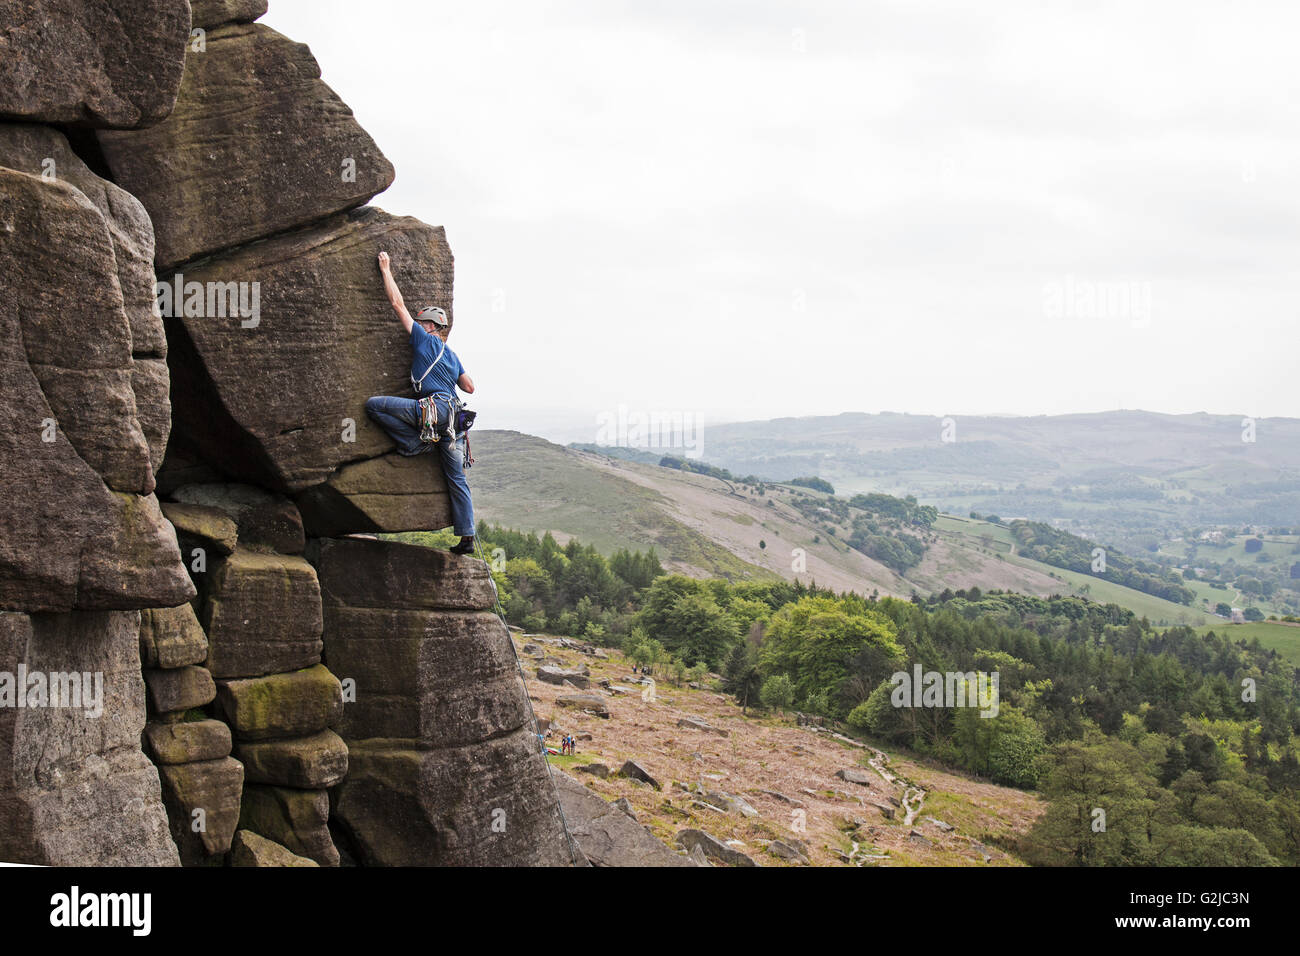 Climber reaching on cliffs of Stanage Plantation in the Peak District, Derbyshire, England. Stock Photo